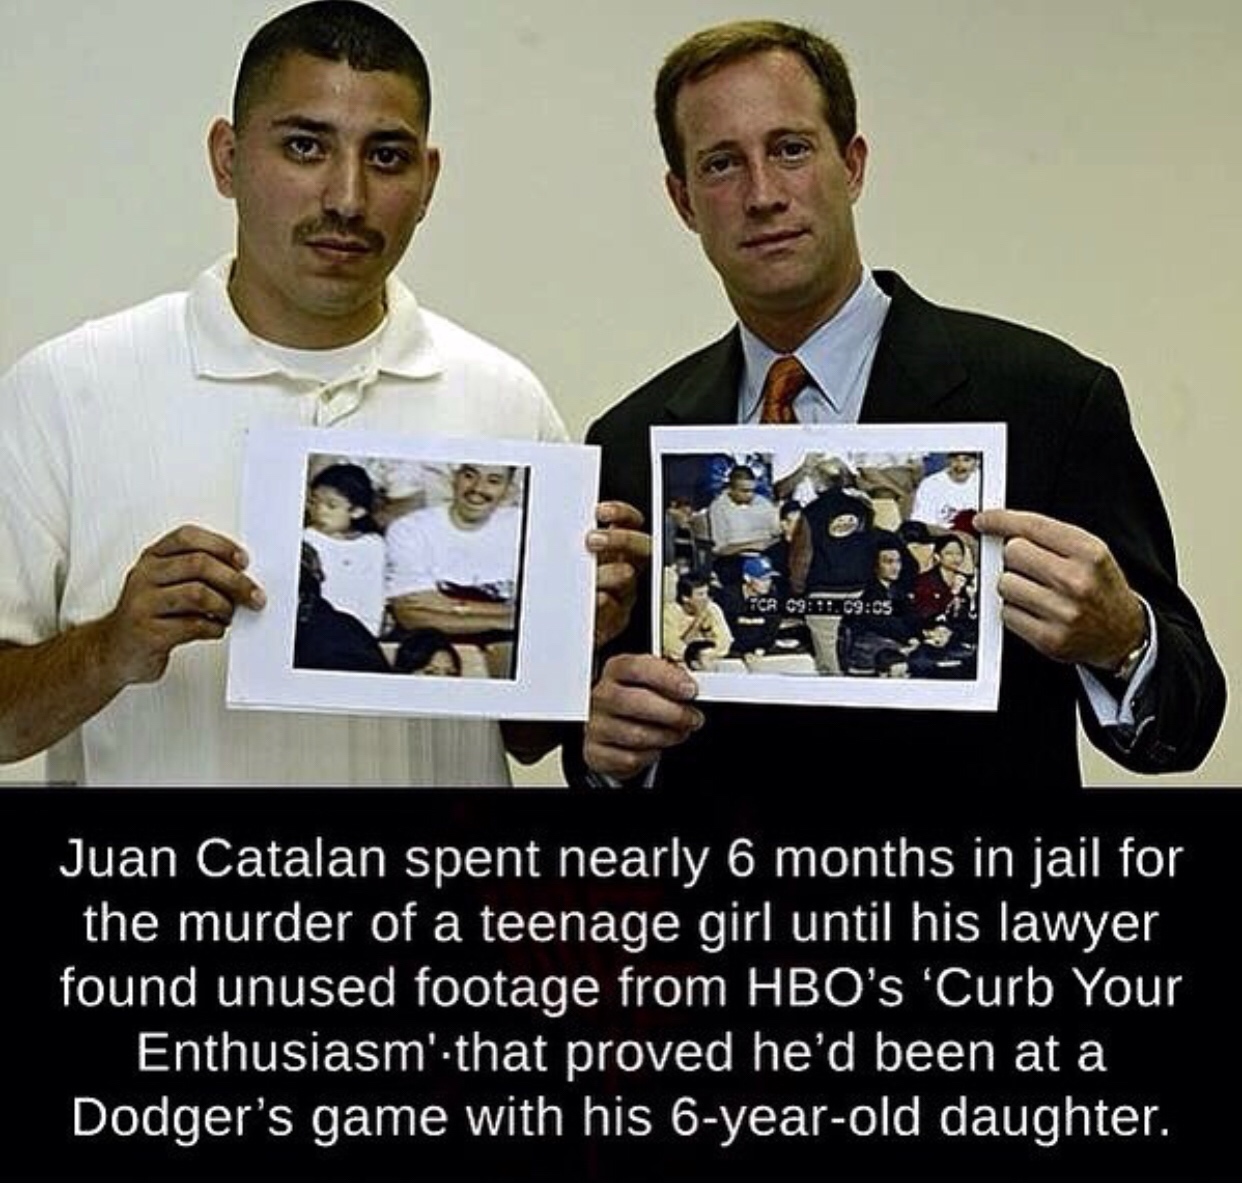 juan catalan - Fca . Juan Catalan spent nearly 6 months in jail for the murder of a teenage girl until his lawyer found unused footage from Hbo's 'Curb Your Enthusiasm'that proved he'd been at a Dodger's game with his 6yearold daughter.